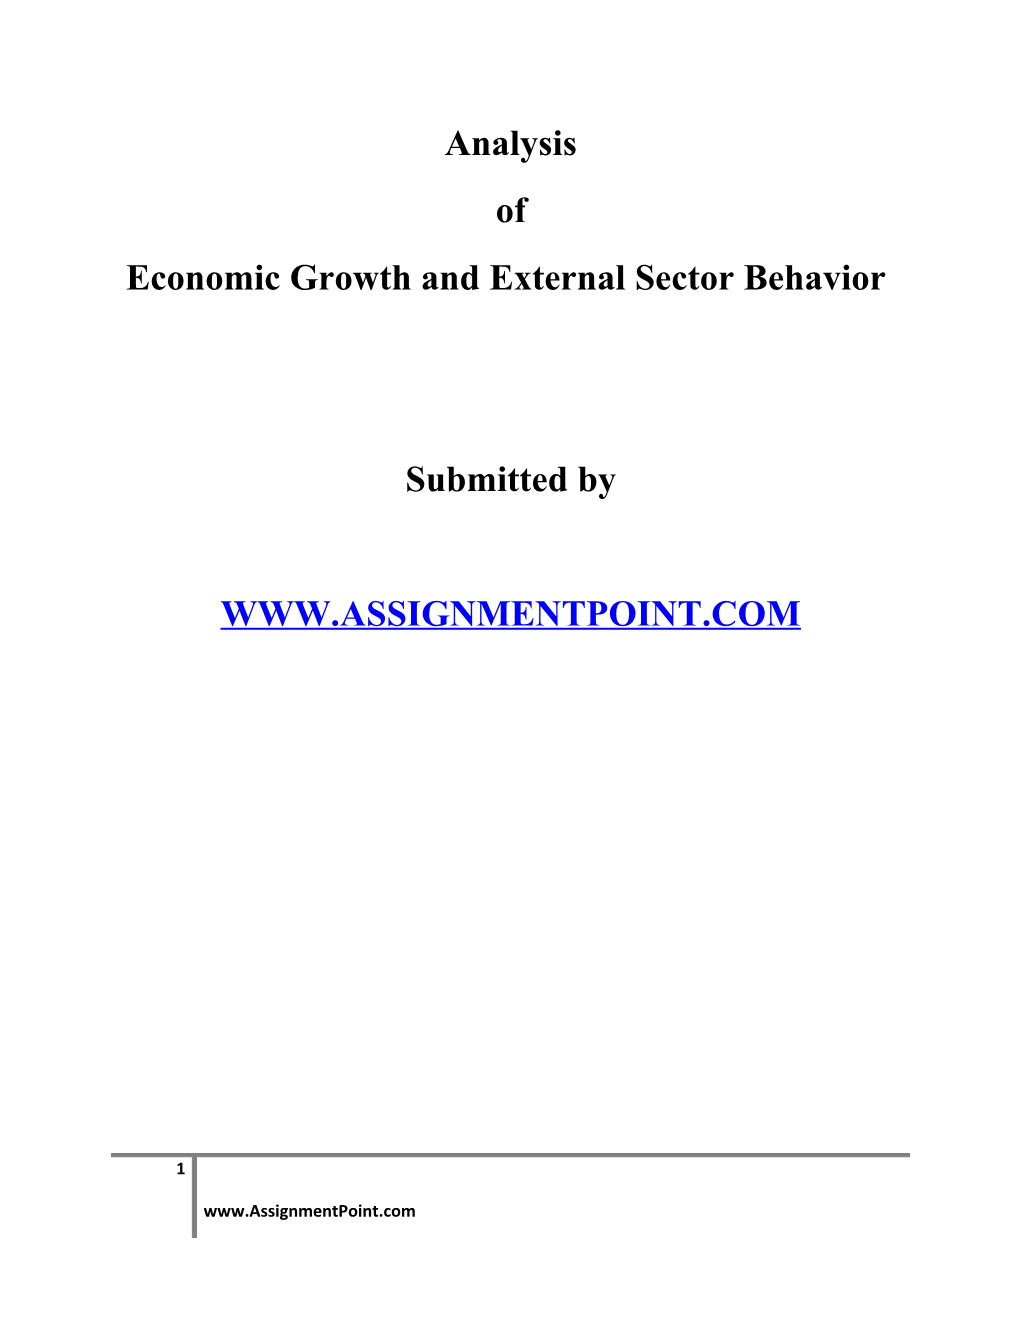 Economic Growth and External Sector Behavior